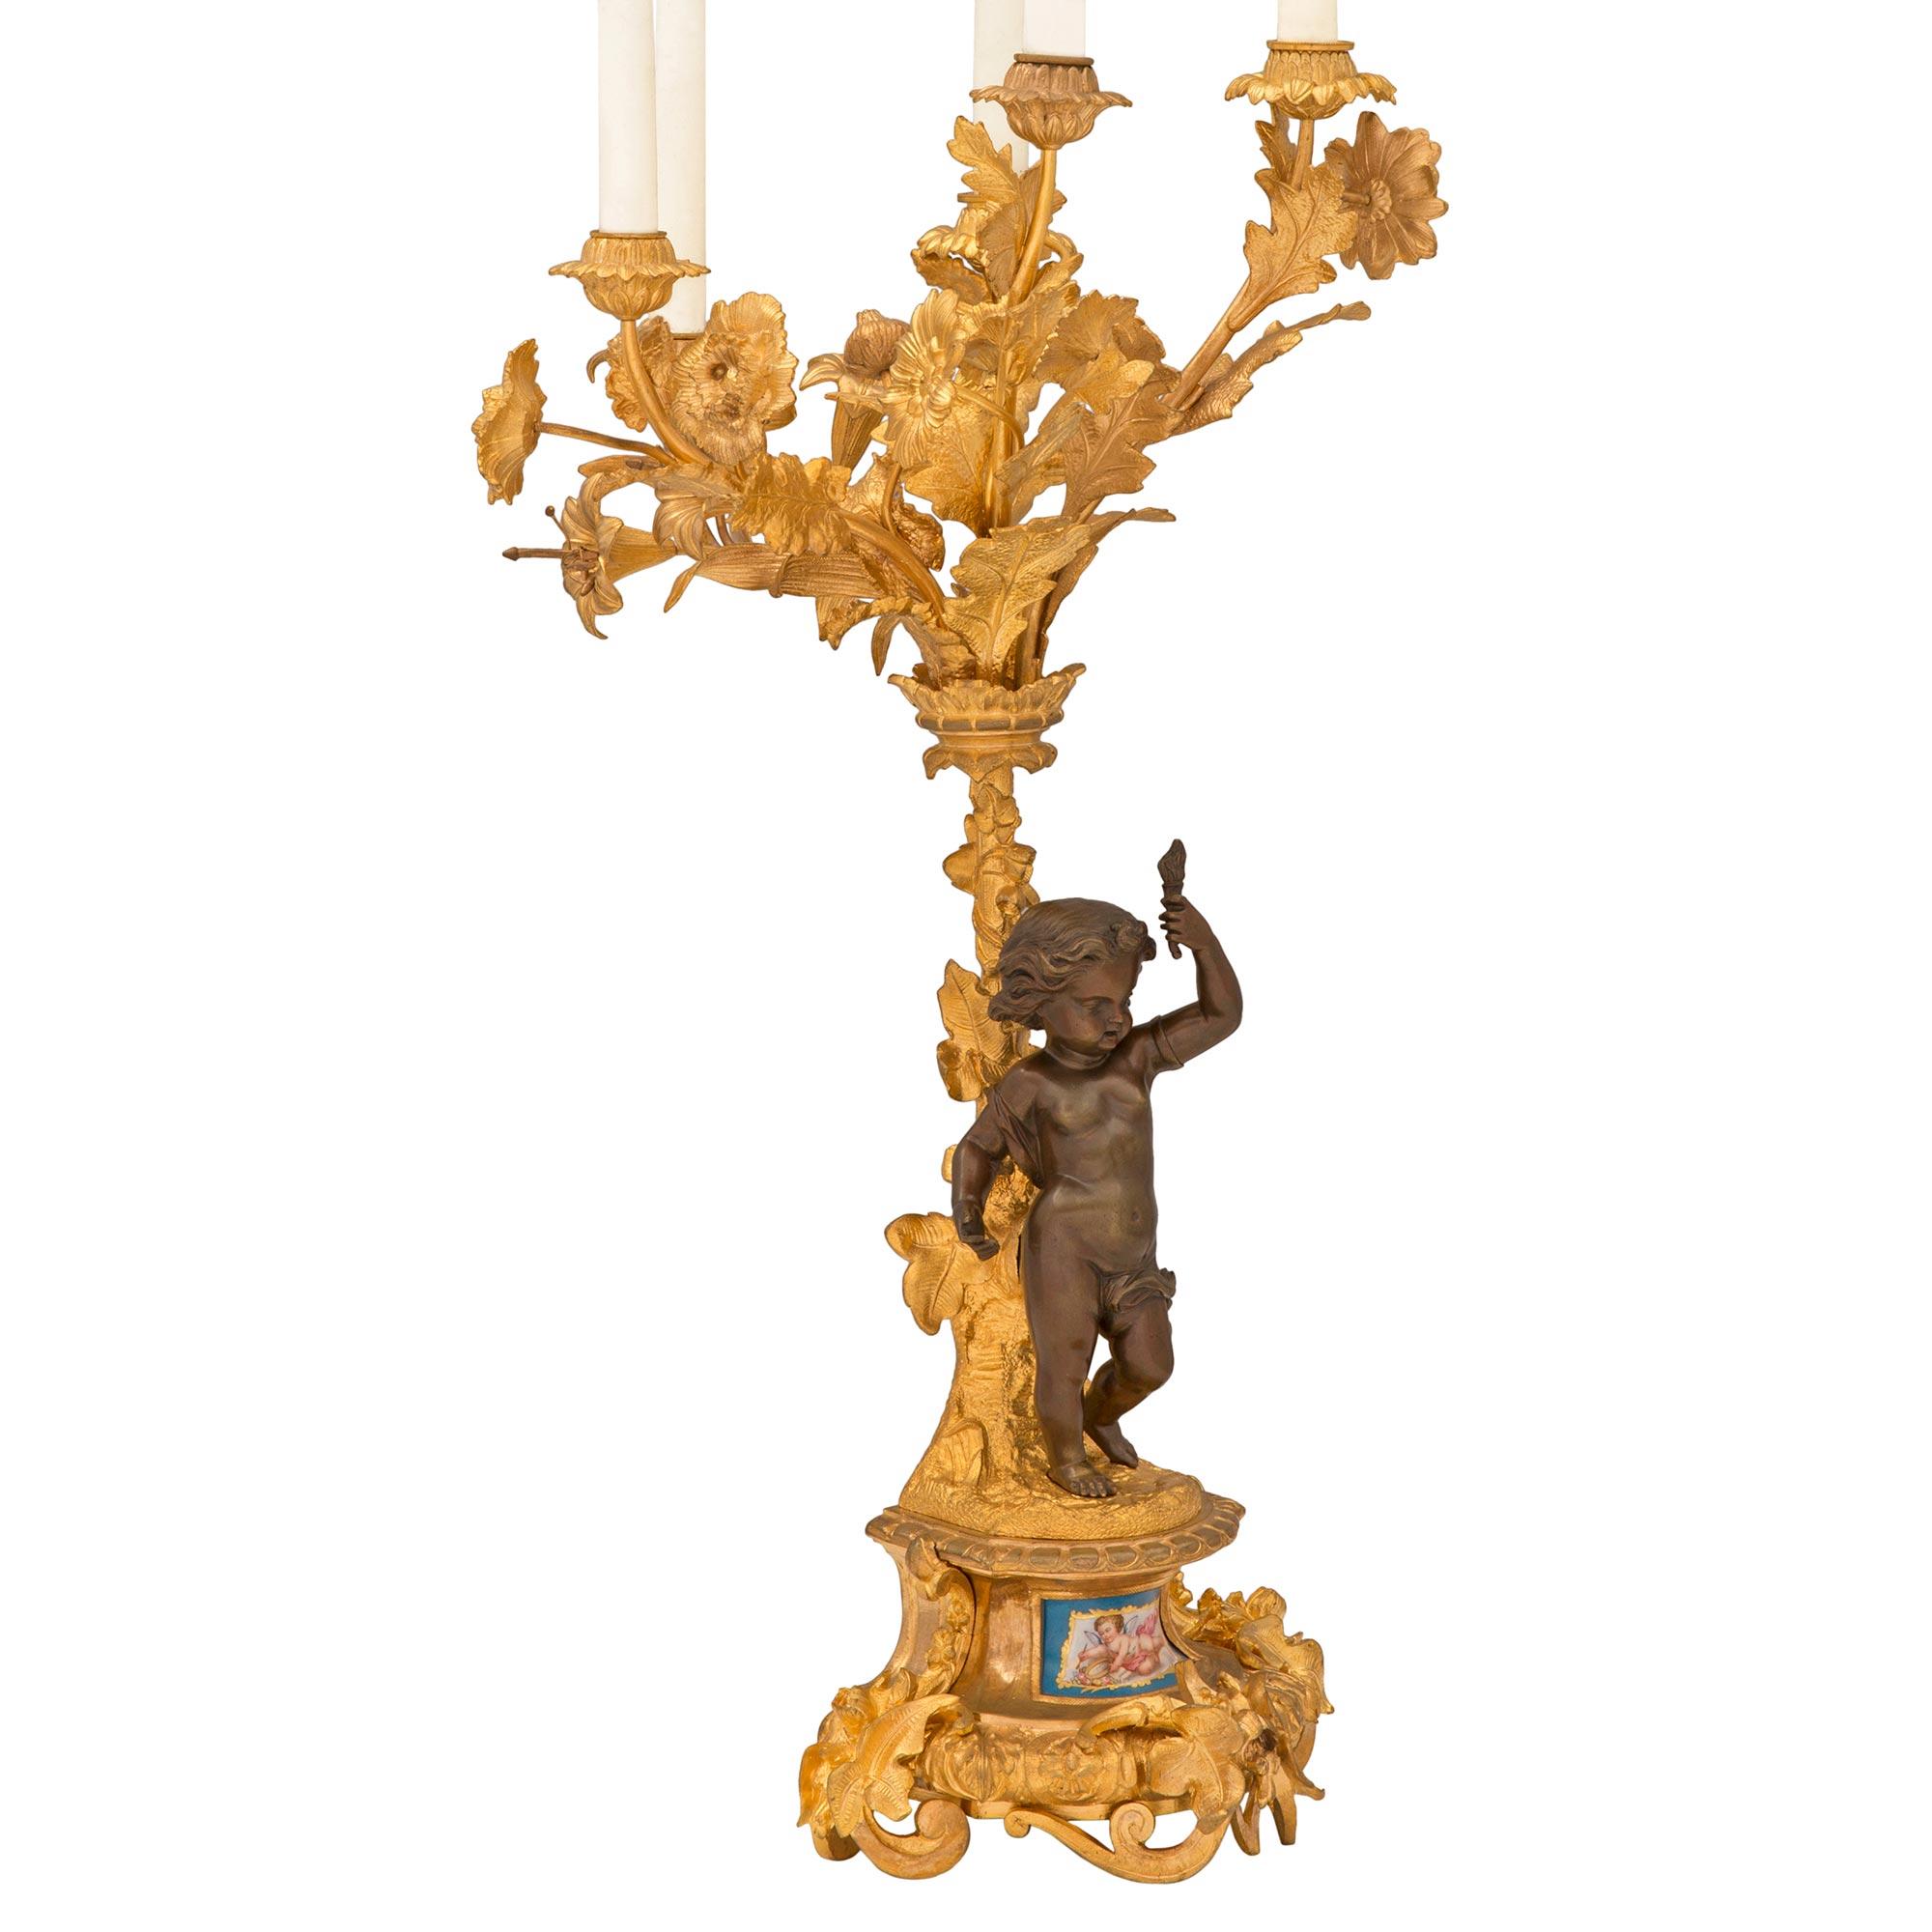 A striking true pair of French 19th century Louis XVI st. ormolu, patinated bronze and Sèvres porcelain candelabras. Each five arm candelabra is raised by a stunning pierced scrolled foliate base with lovely floral accents and a beautiful and most